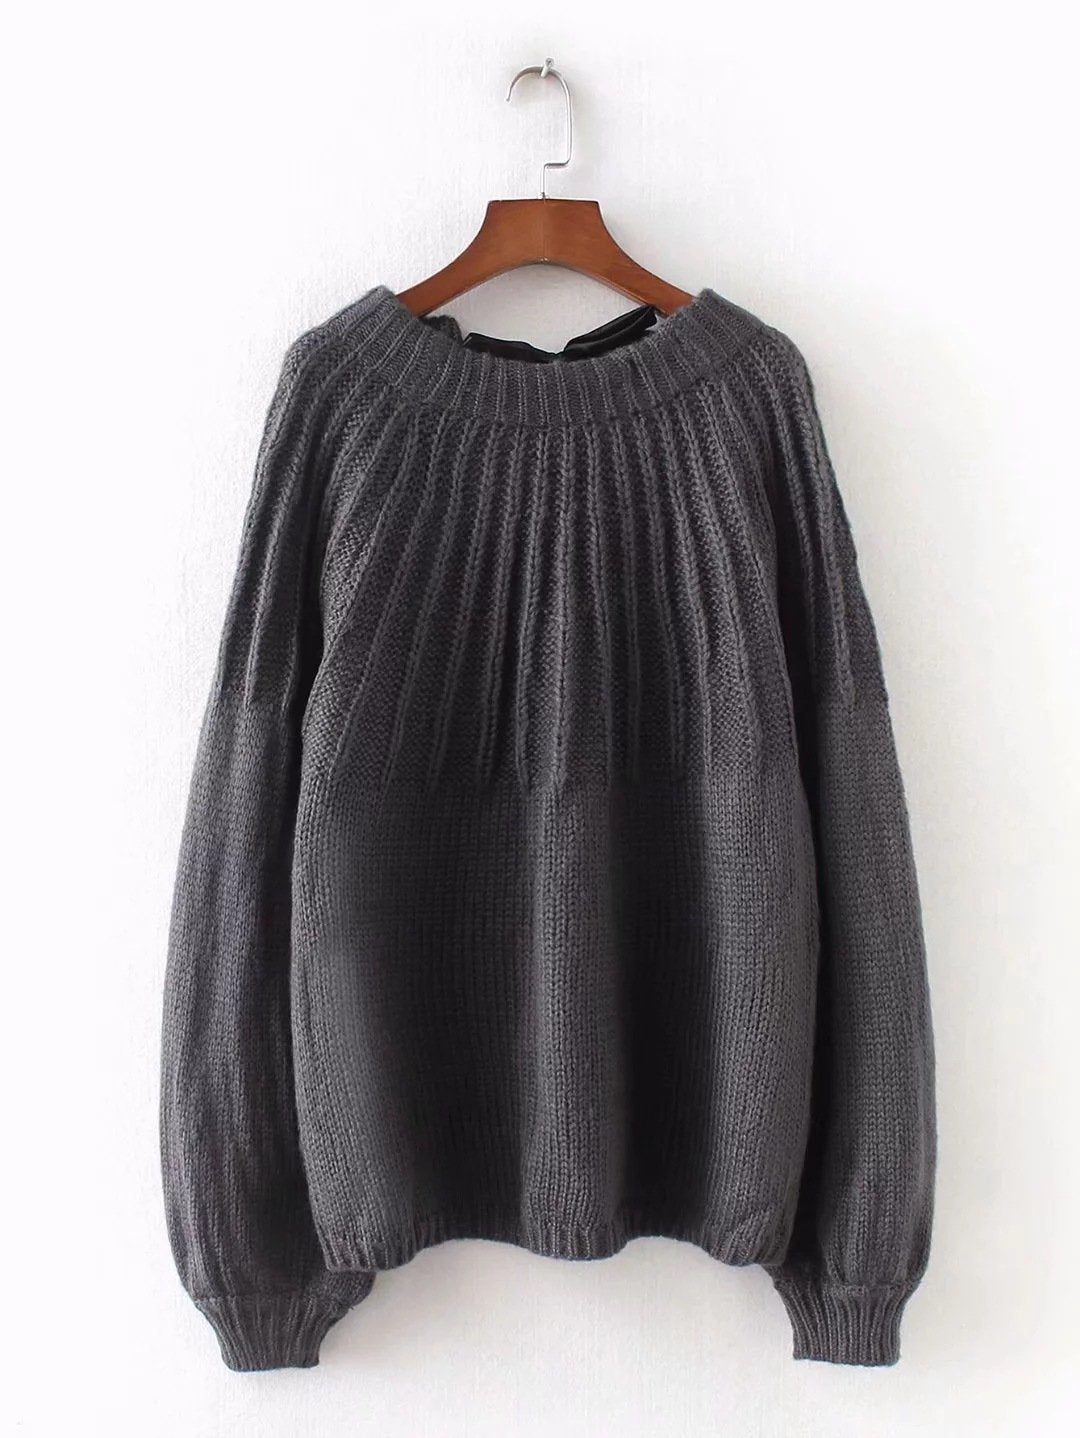 Mohair Backless Straps Bowknot Long Lantern Sleeves Women Pullover Sweater